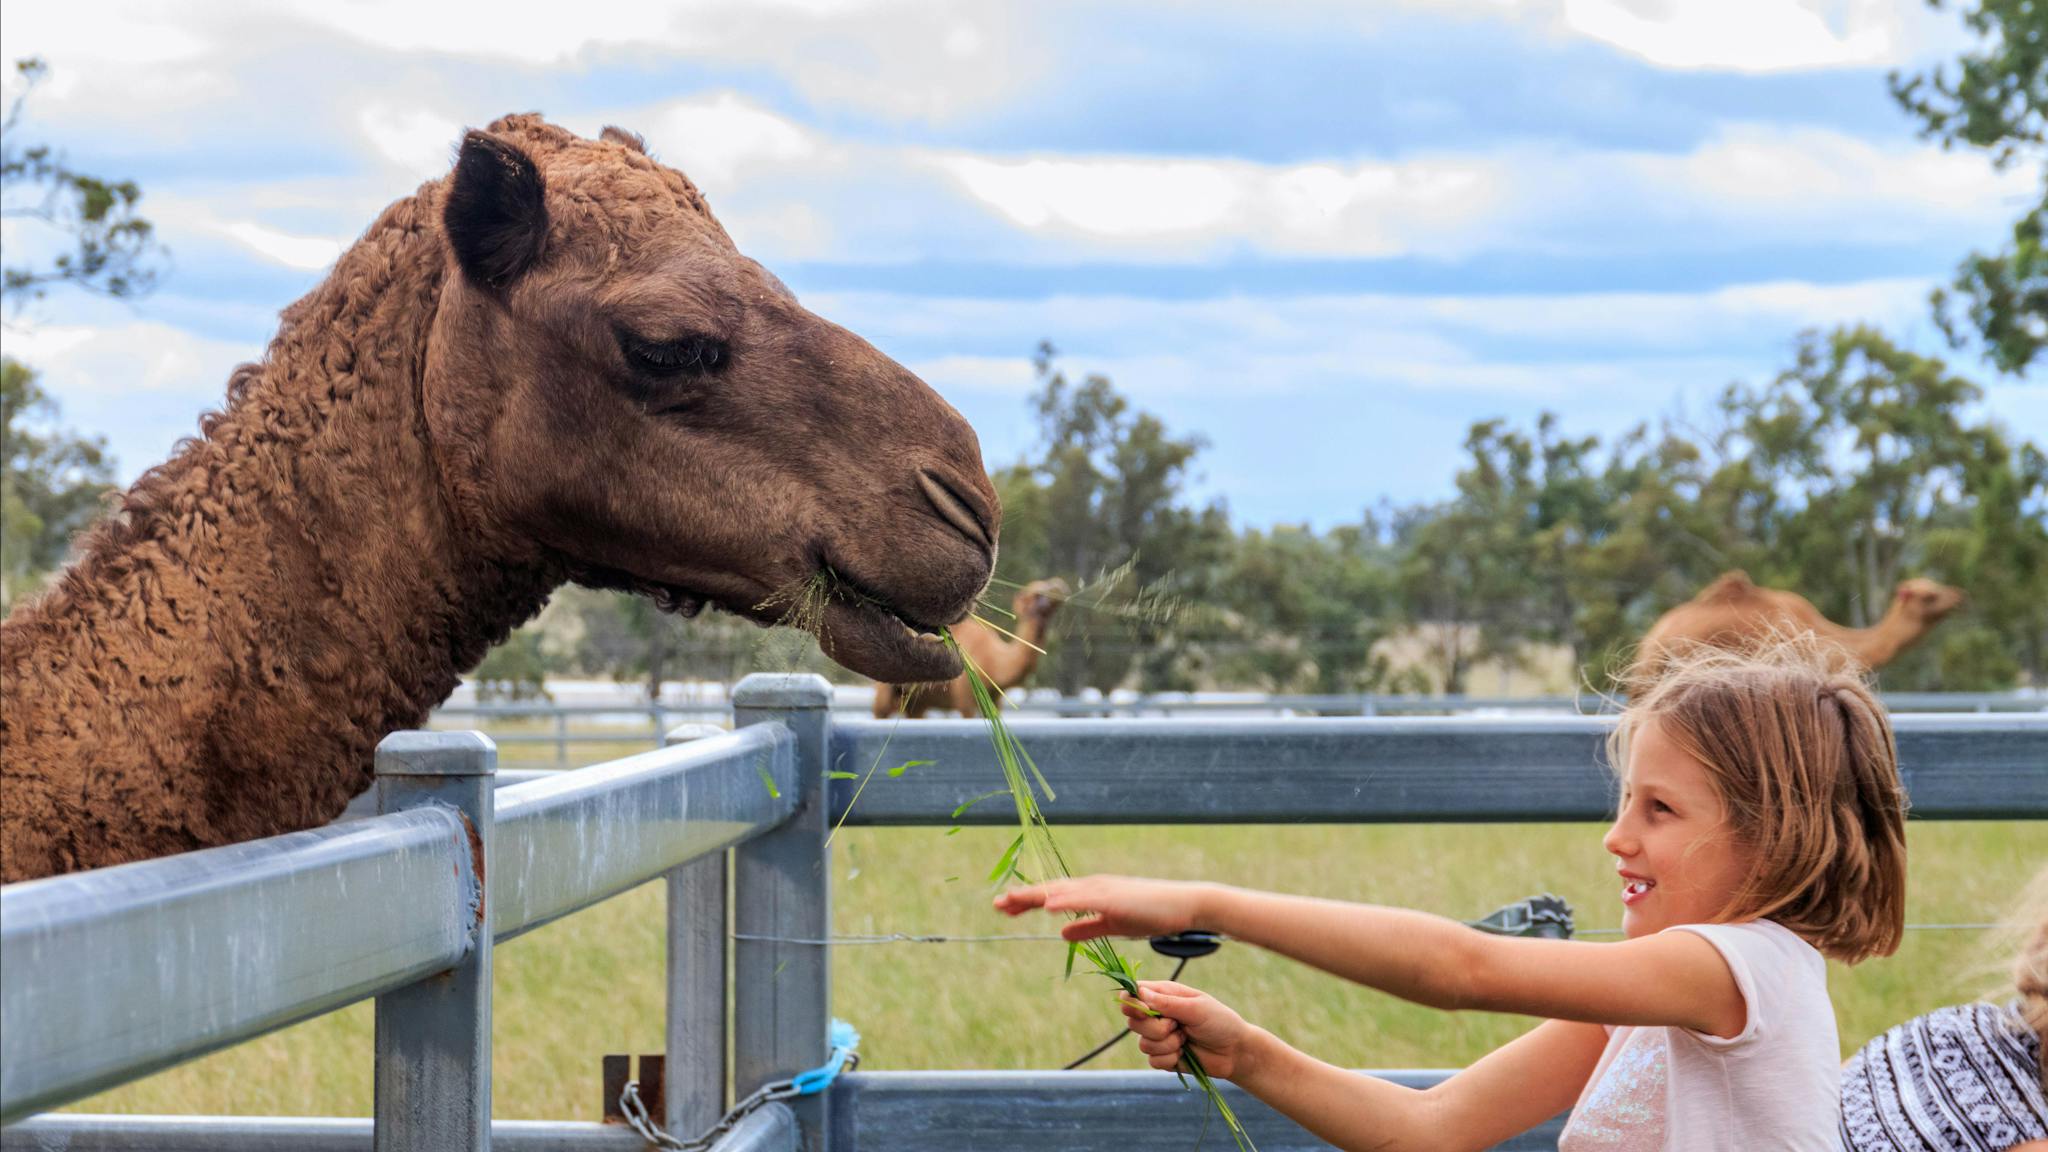 Get hands-on with the gentle camels at Summer Land Camel Farm